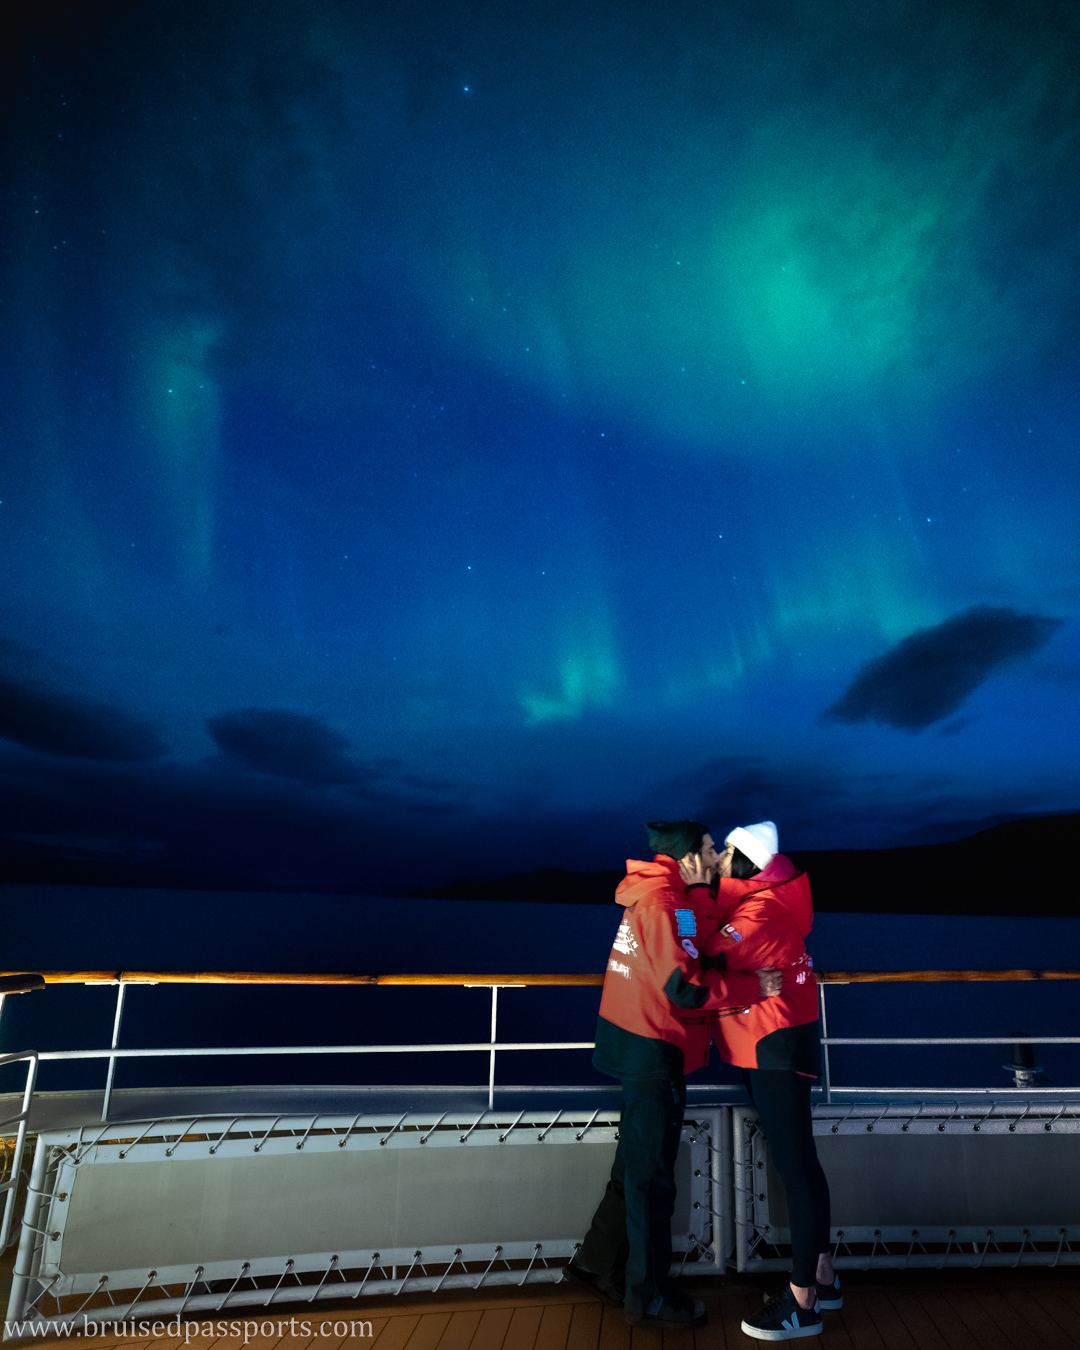 couple under northern lights in greenland canada on a cruise ship 